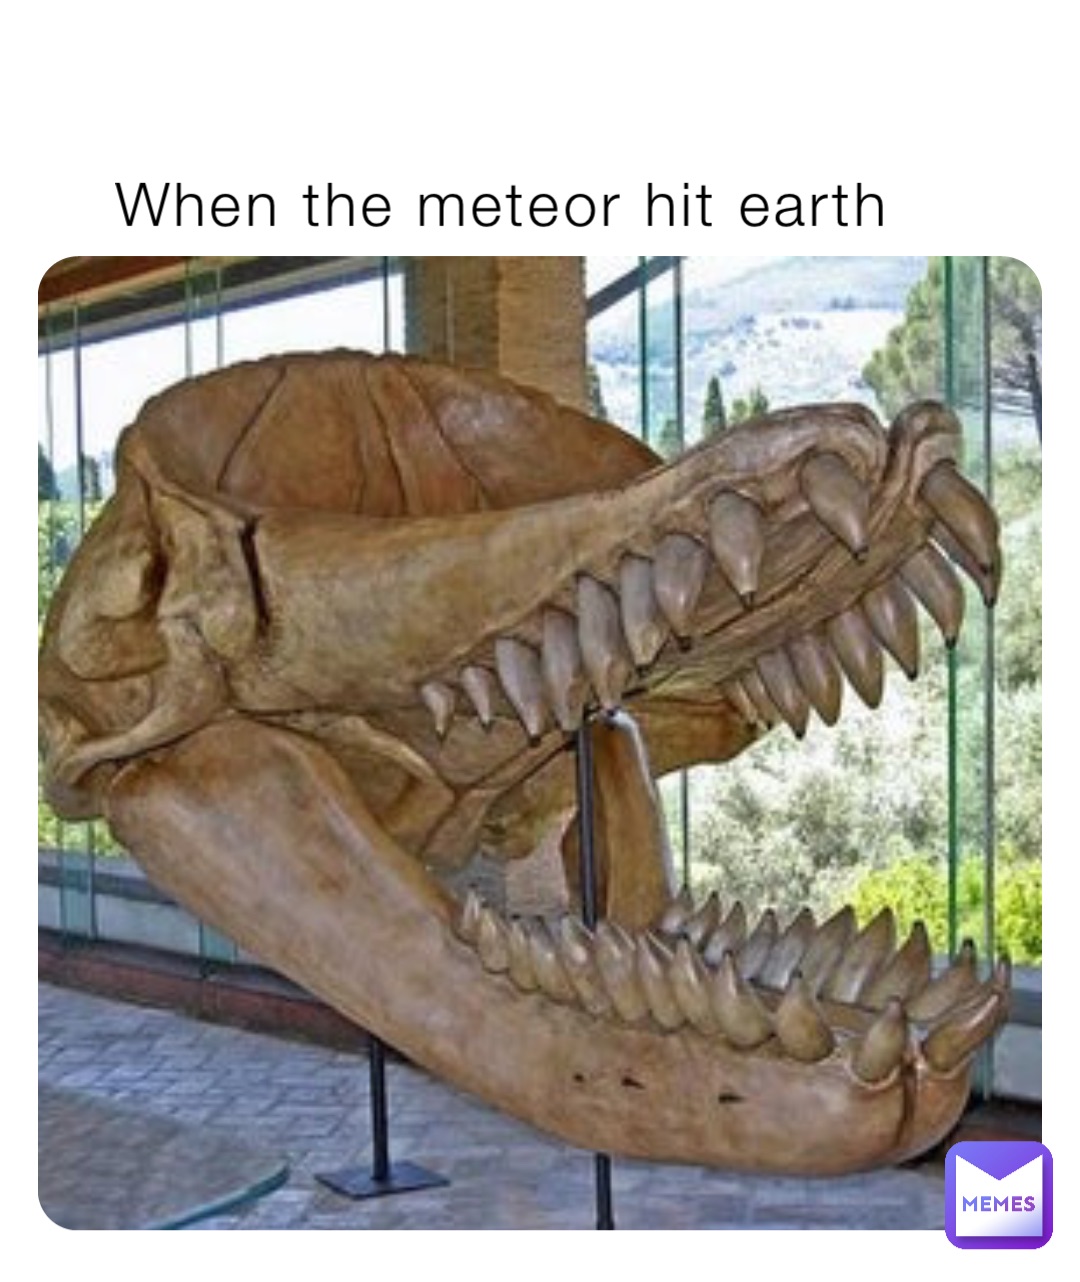 When the meteor hit earth